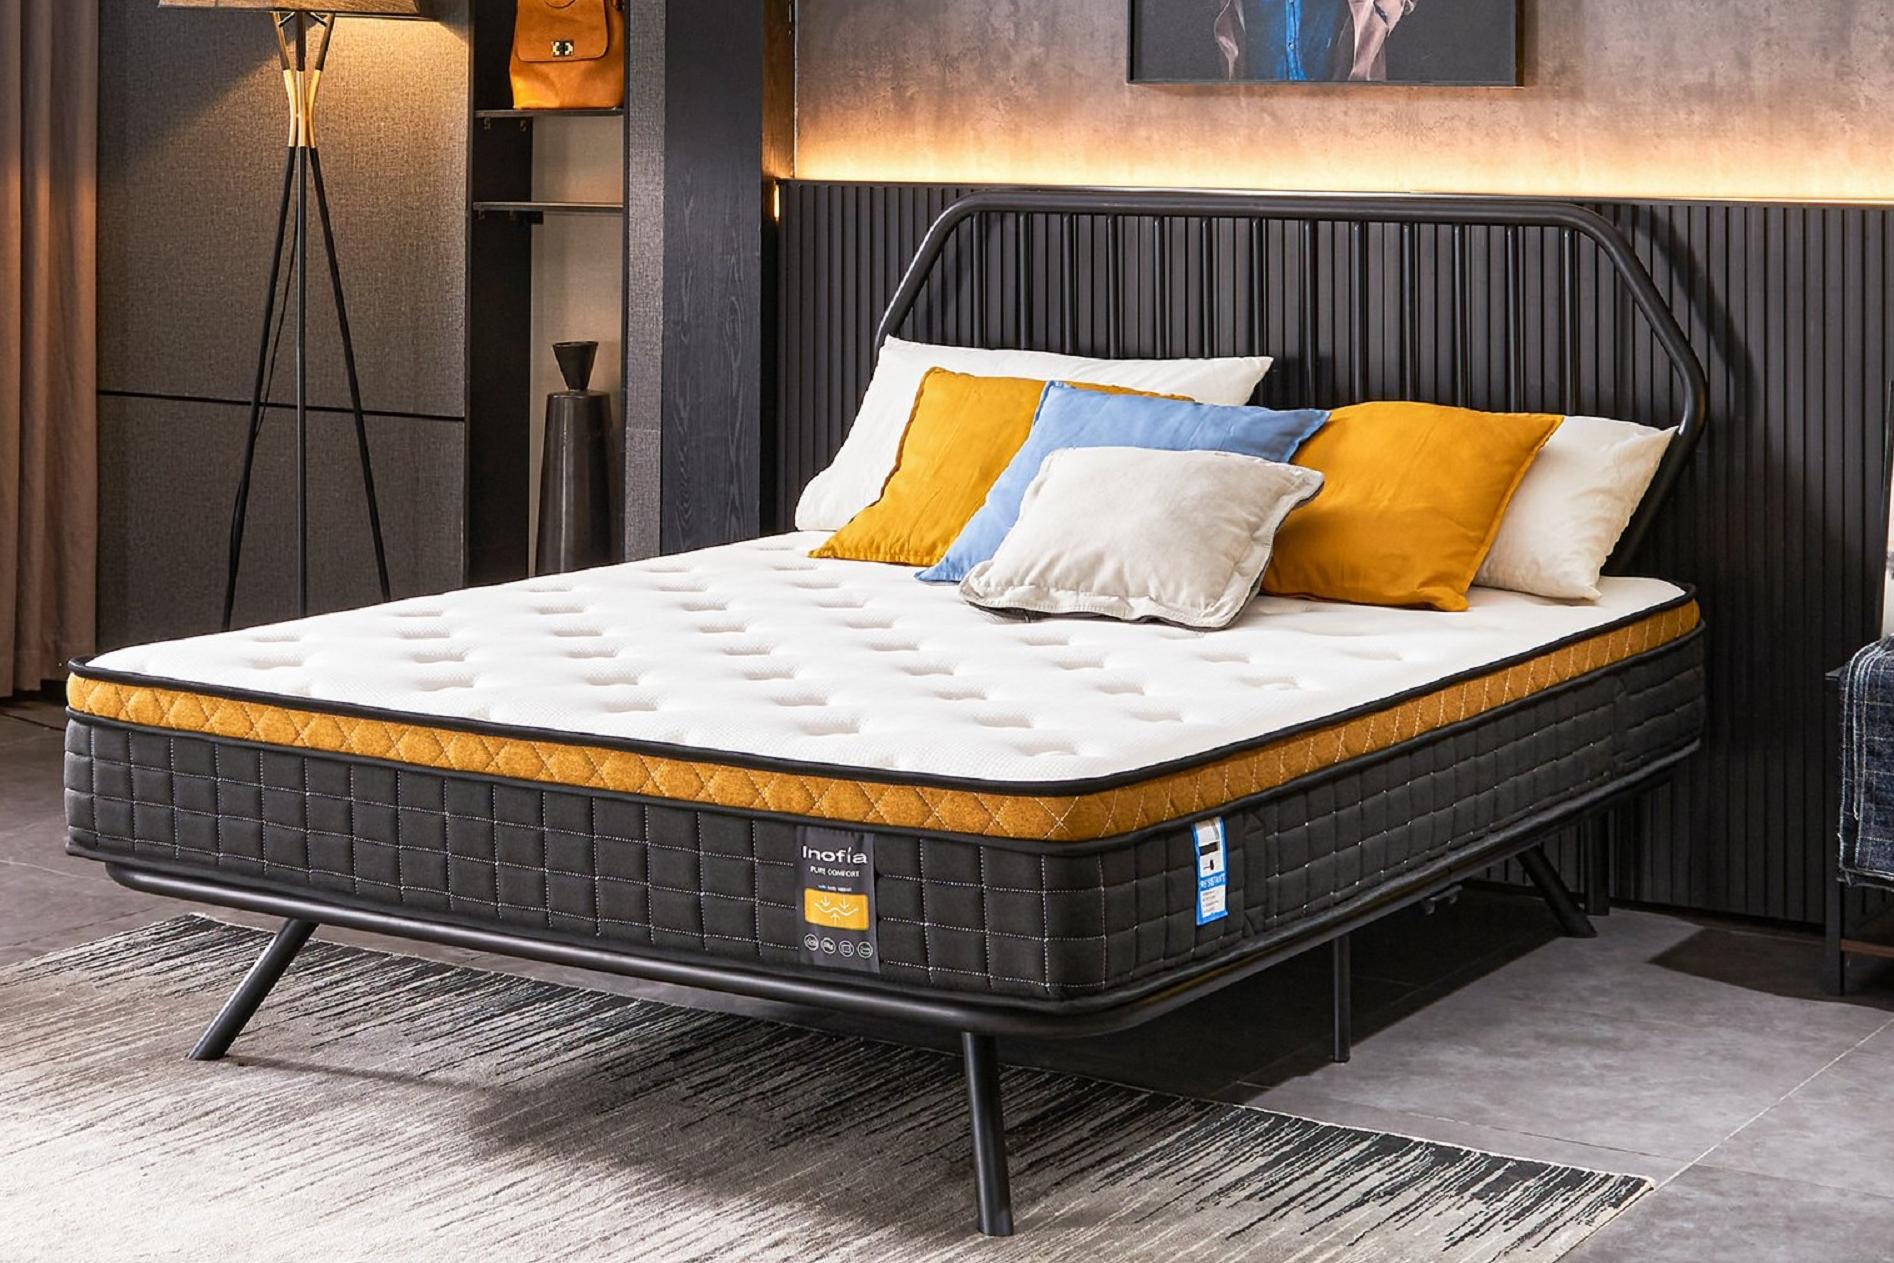 Comfortable Nights and a Perfect Night's Sleep on a New King Size Mattress